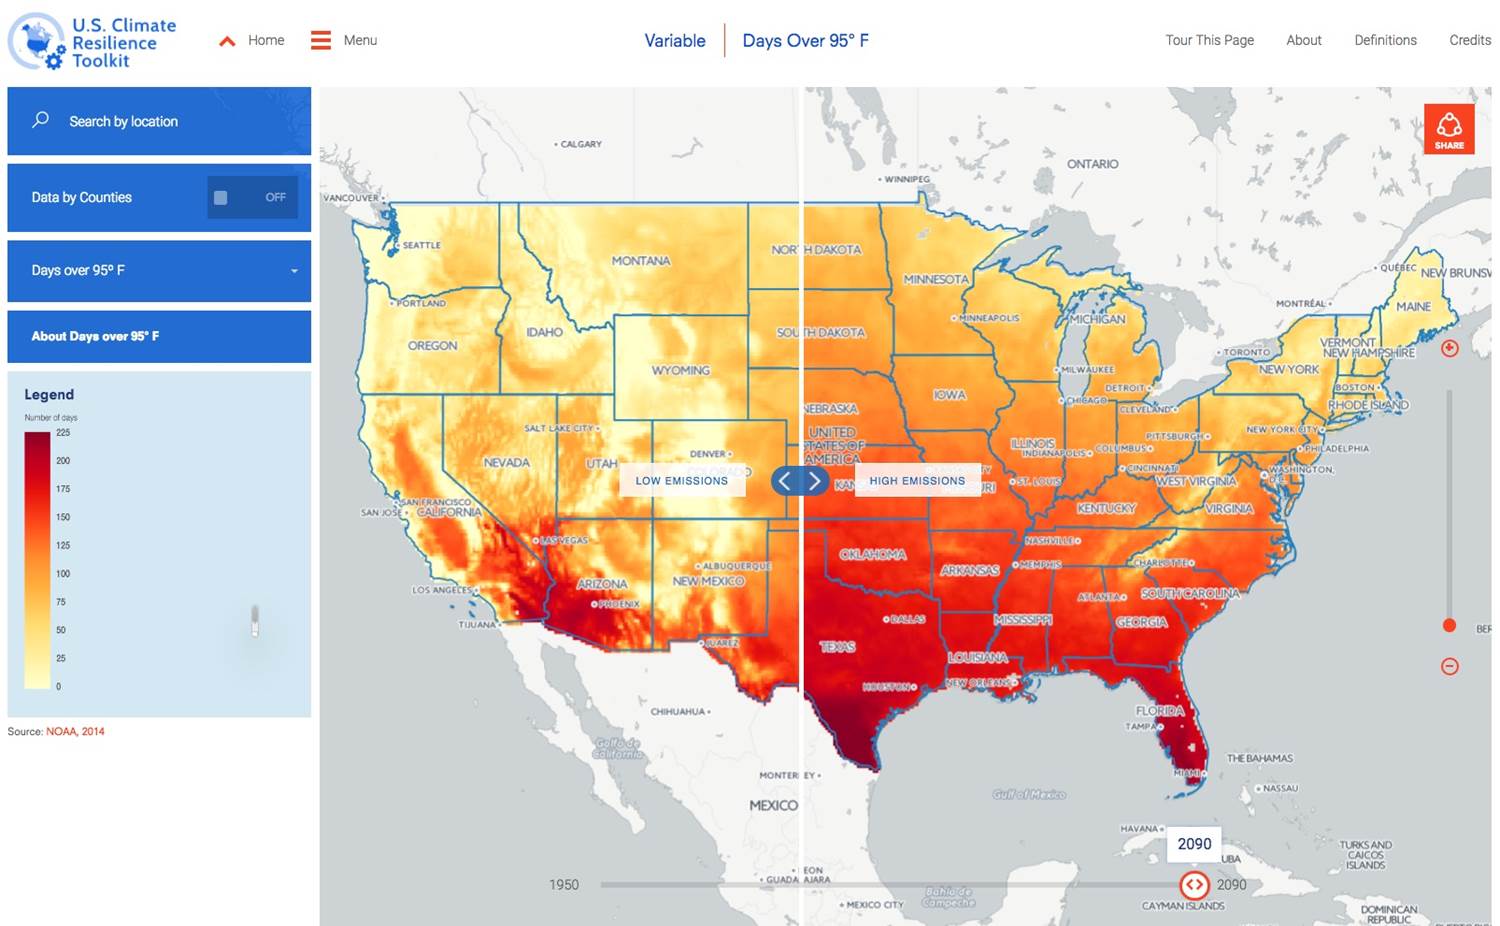 Climate Explorer tool lets users view how the number of days above 95 degrees F may change under future climate scenarios.